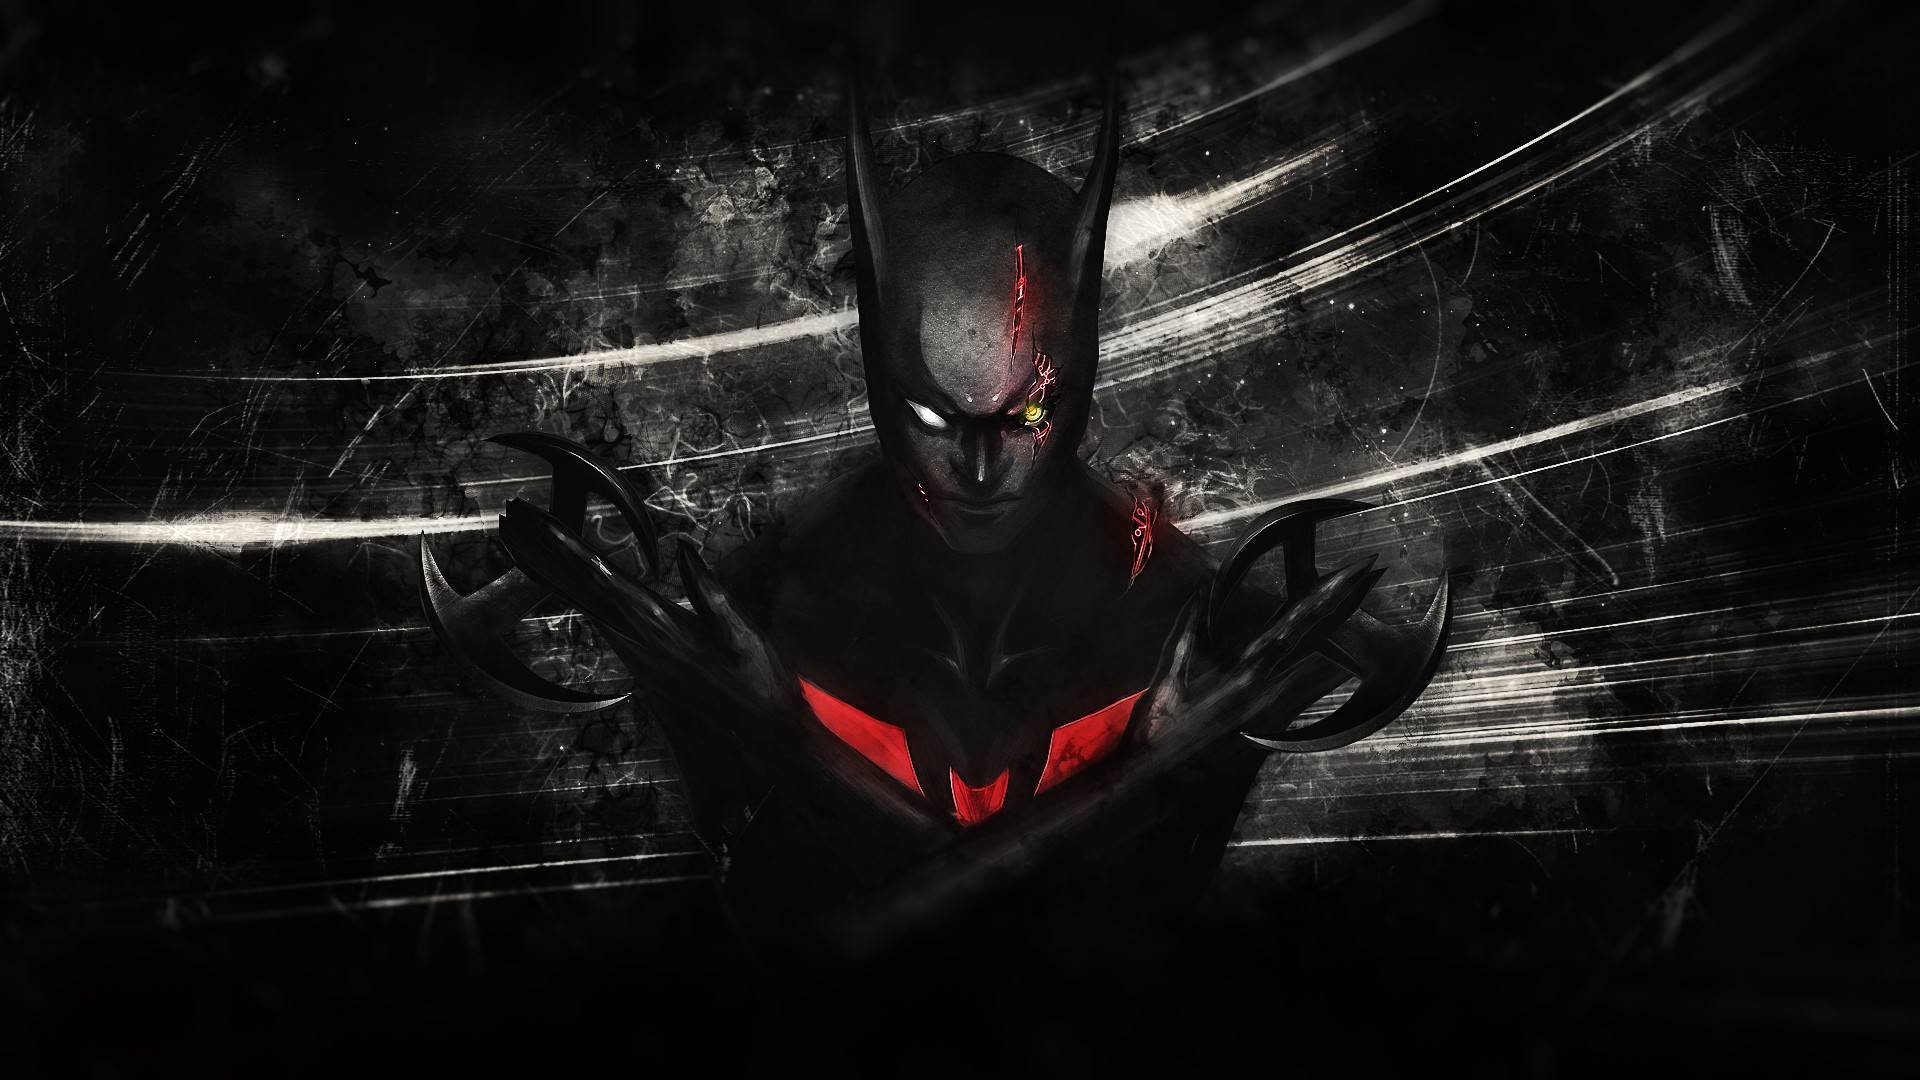 Download full hd 1920x1080 Batman Beyond PC background ID:421042 for free